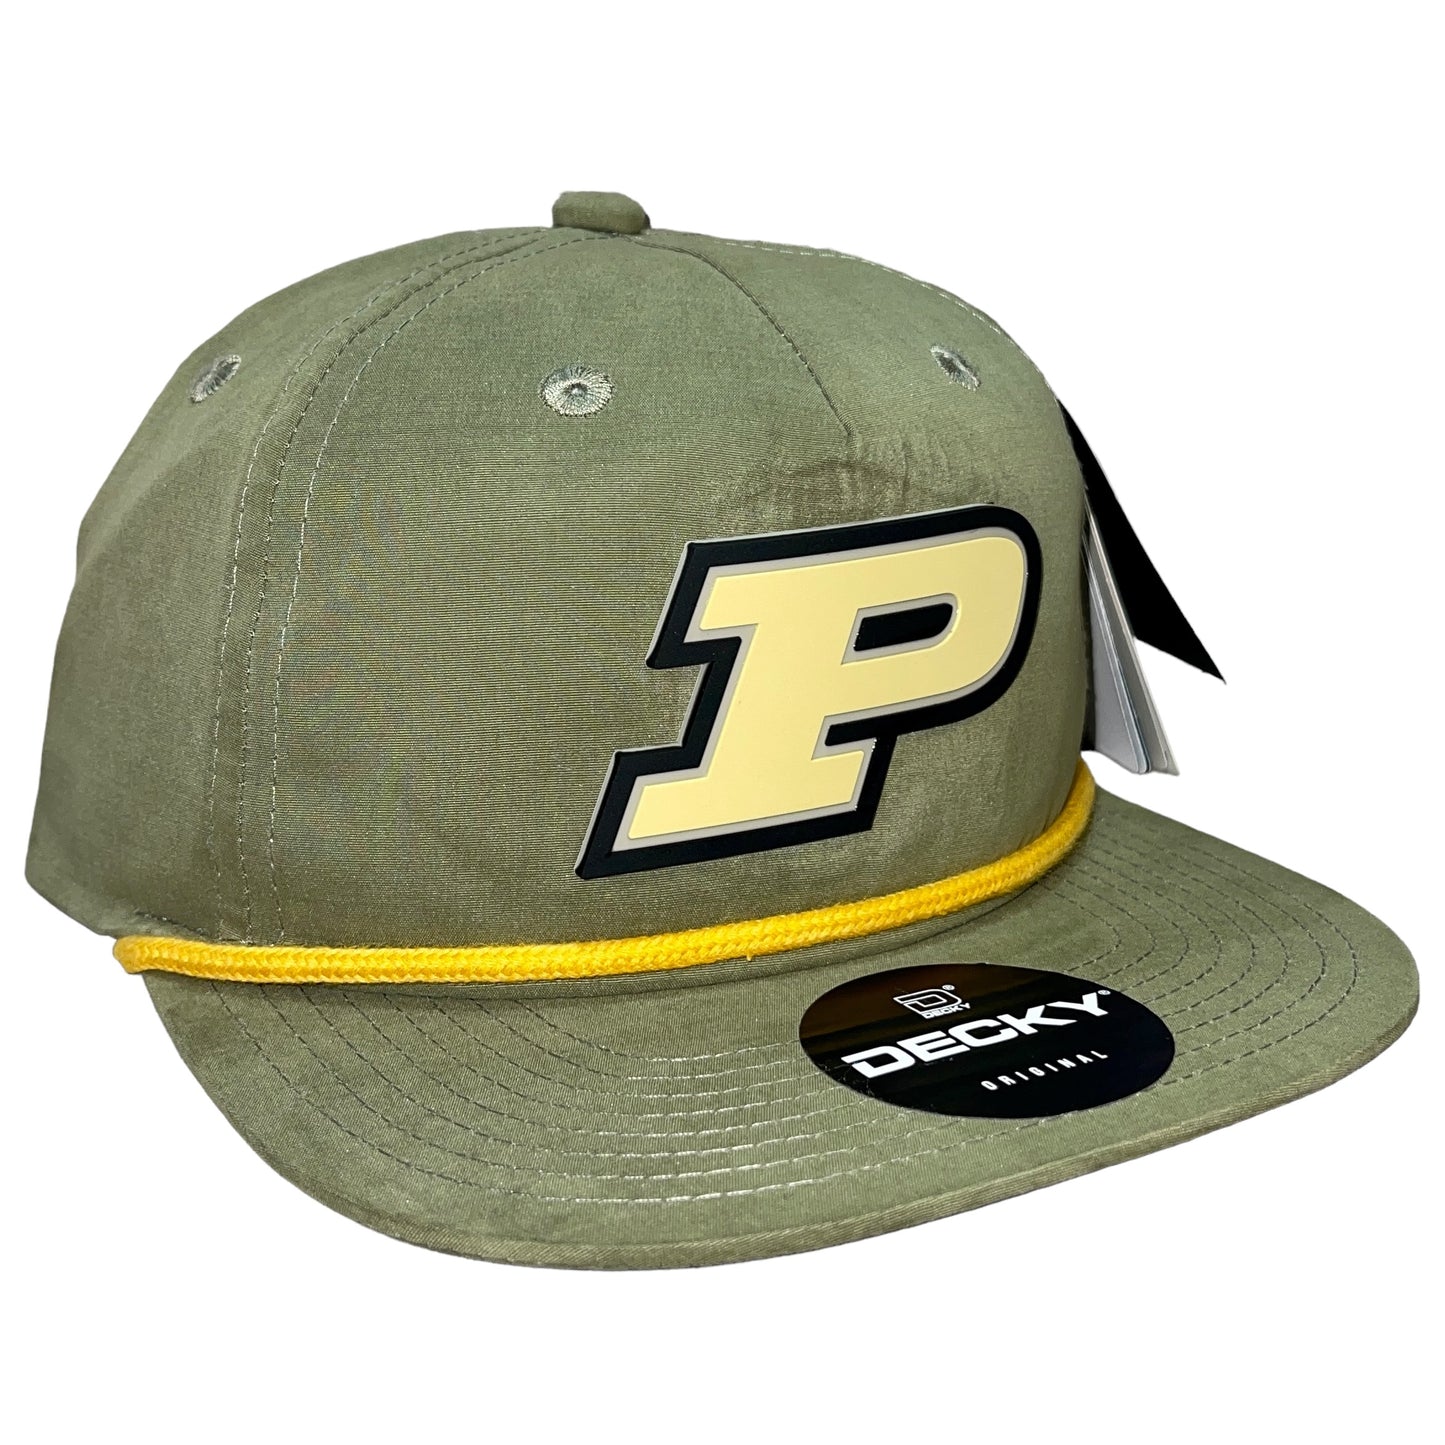 Purdue Boilermakers 3D Classic Rope Hat- Loden/ Amber - Ten Gallon Hat Co.